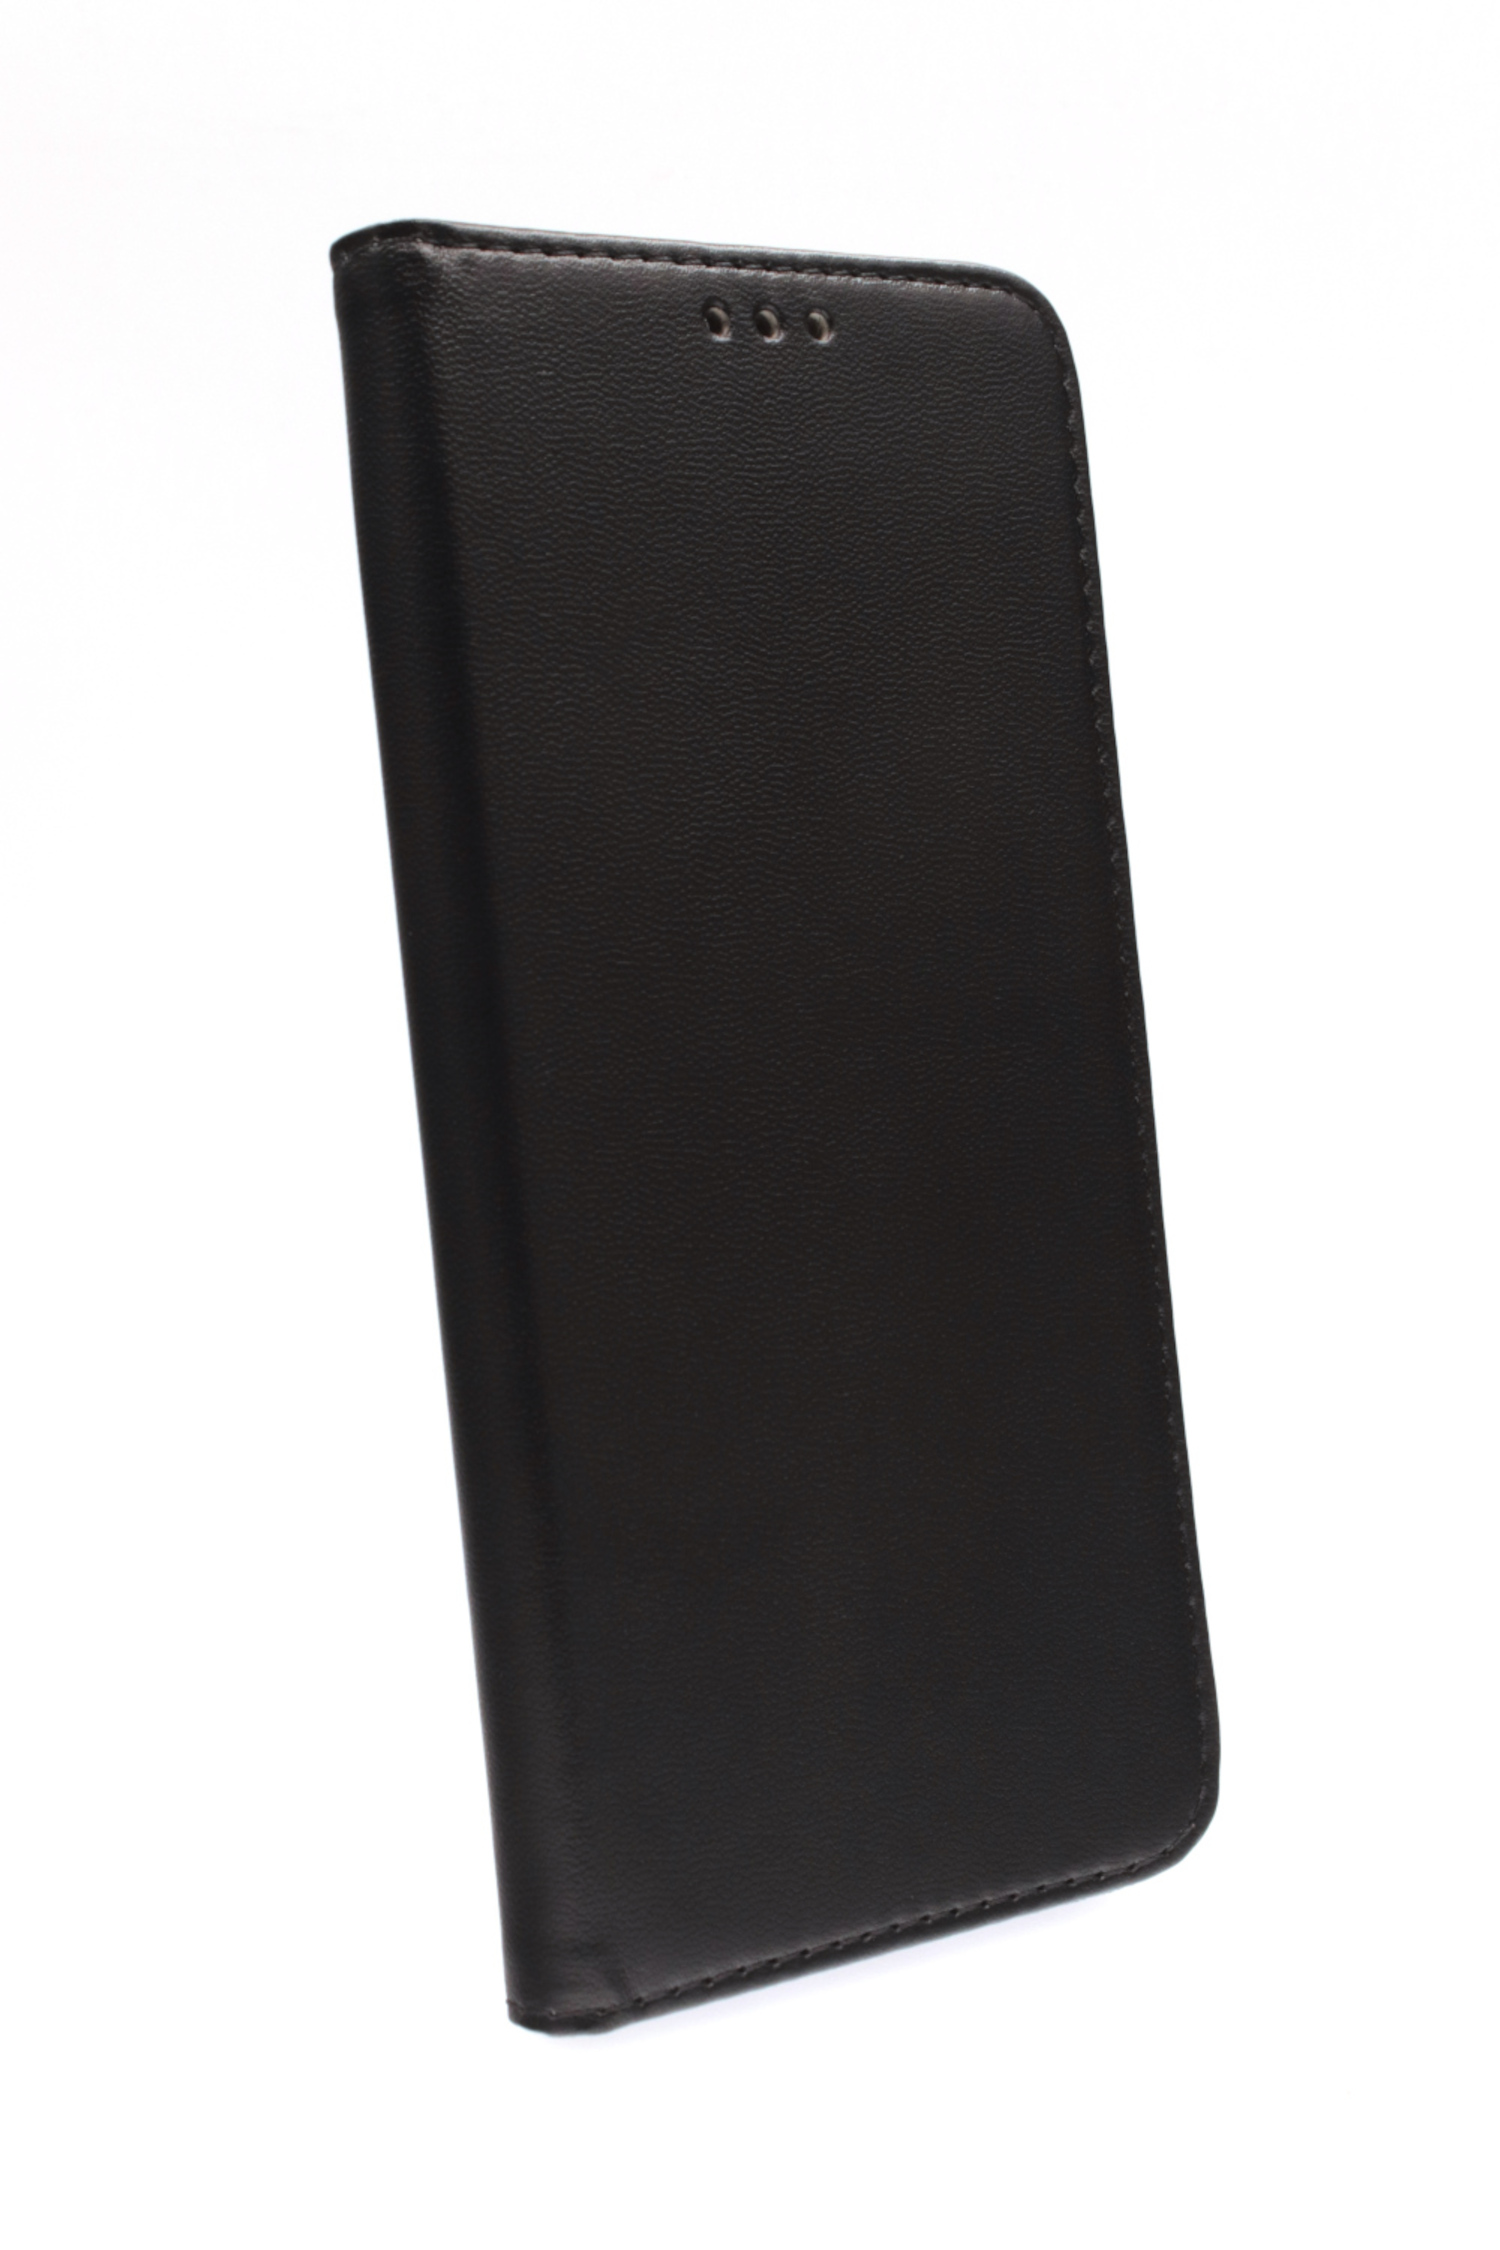 JAMCOVER Bookcase Smooth & Safe, Apple, Schwarz Bookcover, Pro, iPhone 13